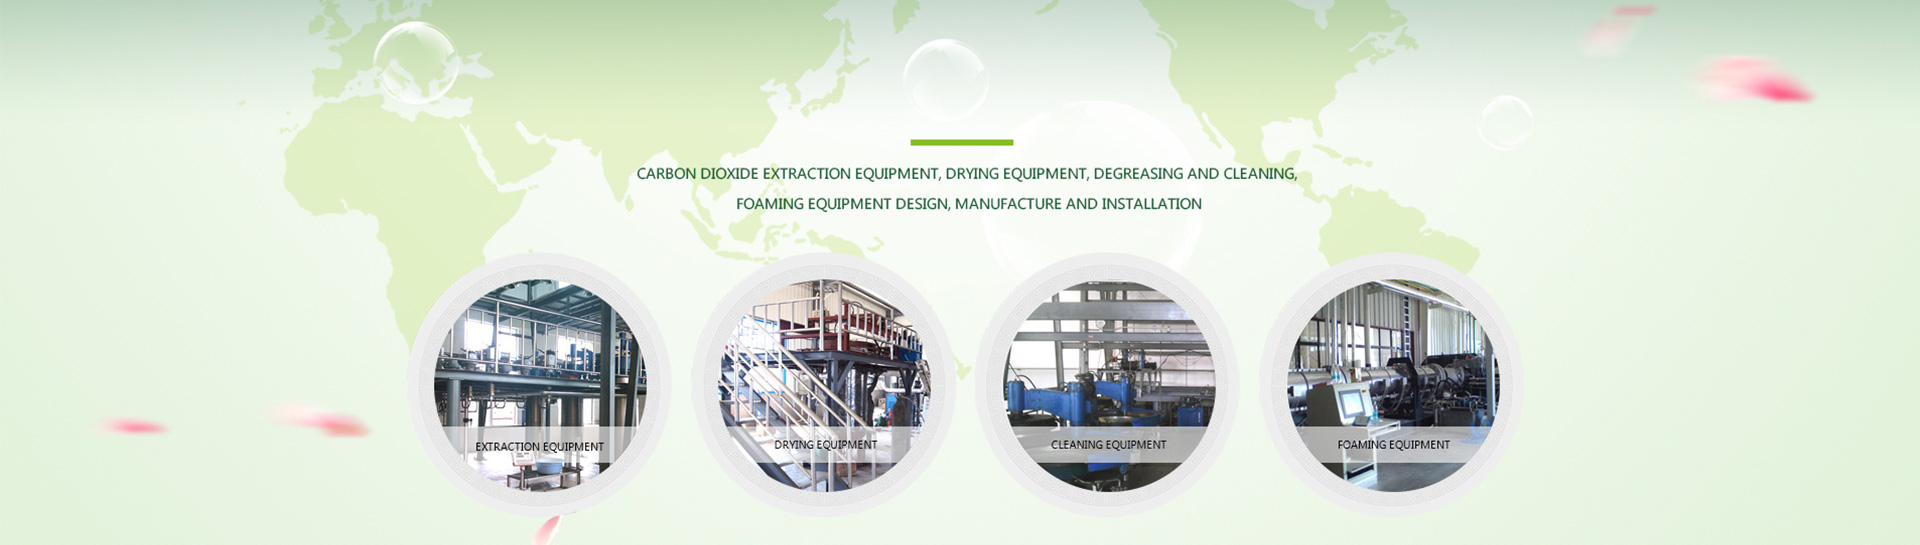 Shenyang solver supercritical extraction equipment co. LTD